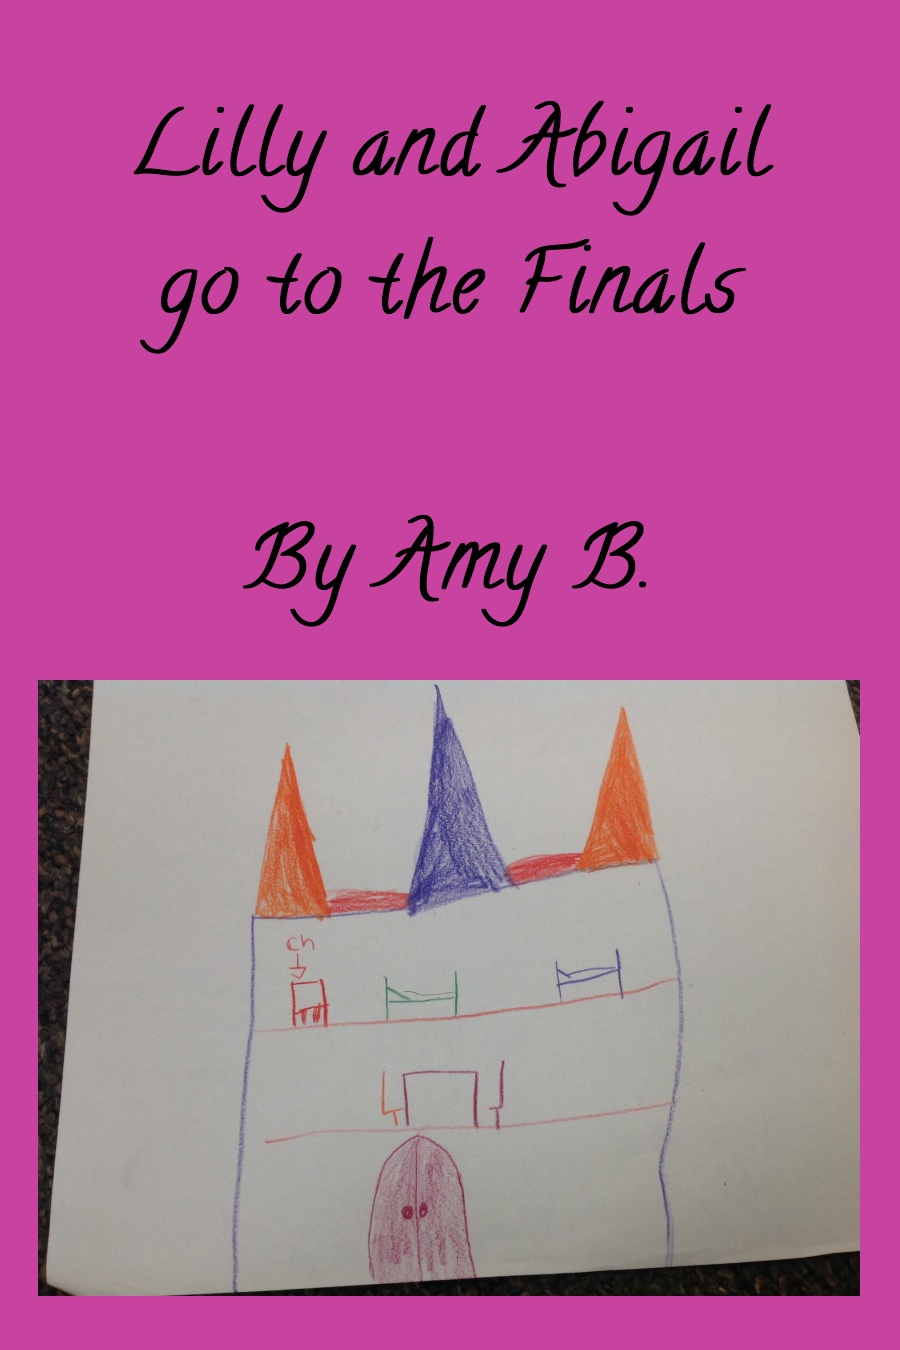 Lilly and Abigail go to the Finals by Amy B